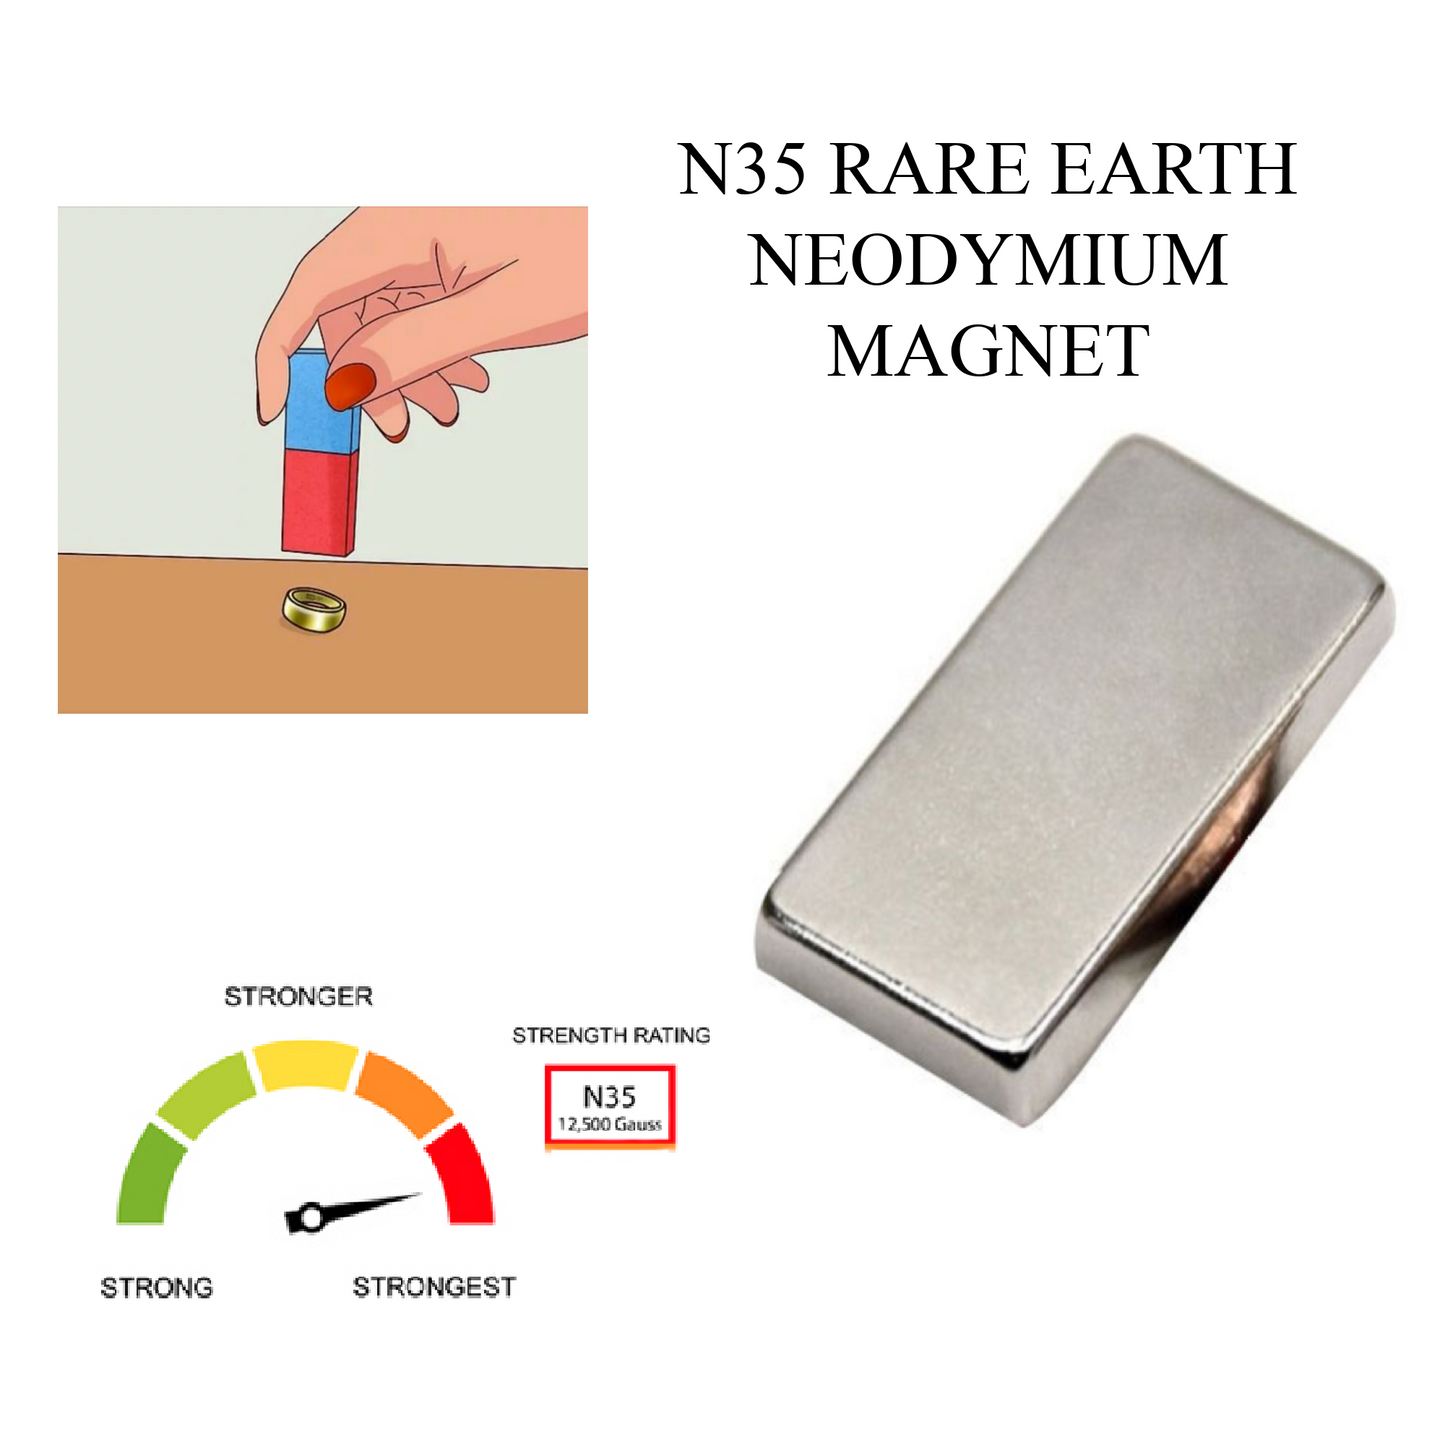 JSP Gold, Silver, & Platinum Jewelry Testing Kit with N35 Neodymium Earth Magnet For Detecting Precious Metals 22K 24K